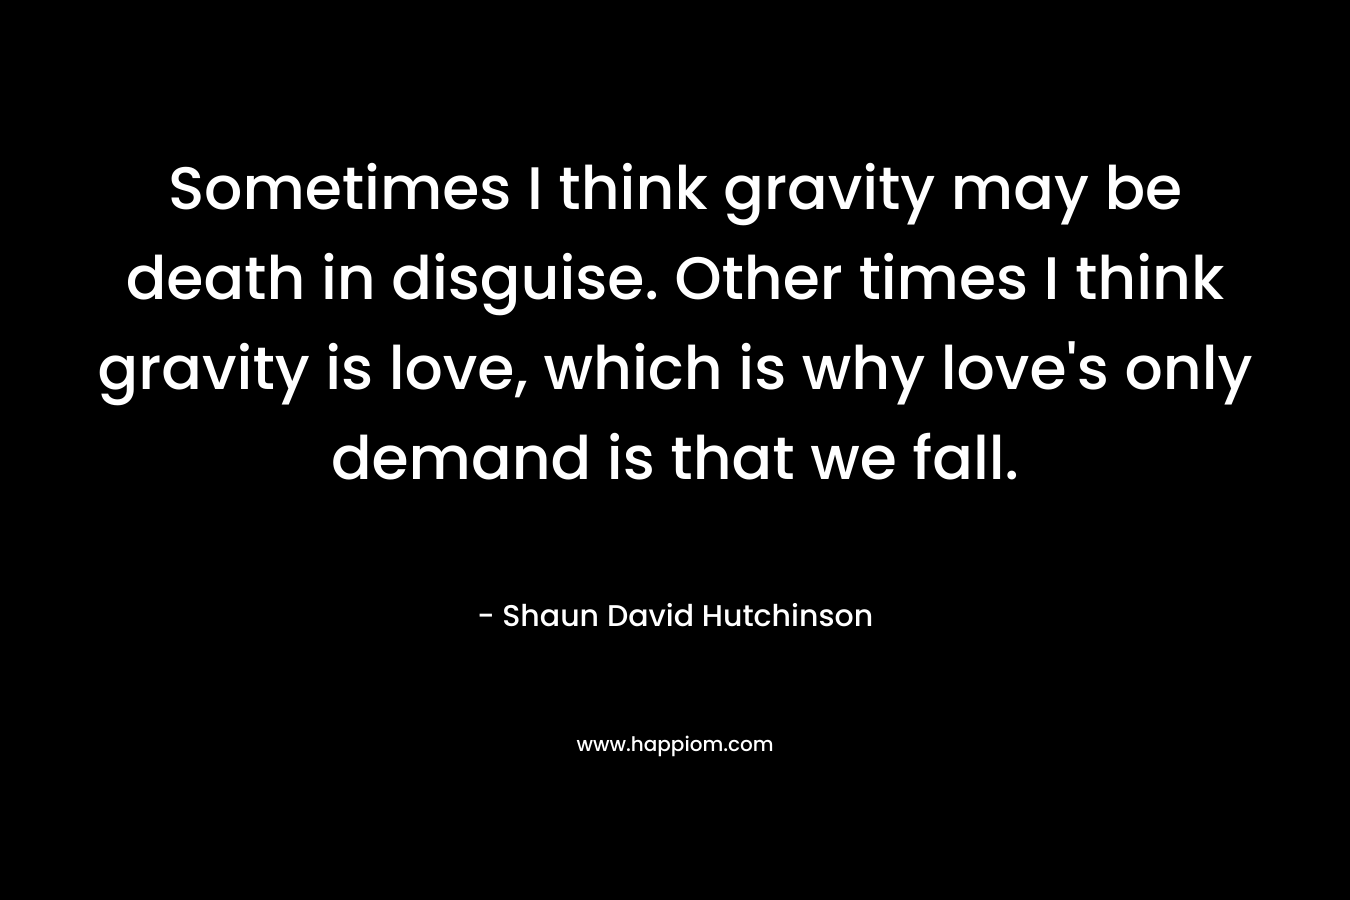 Sometimes I think gravity may be death in disguise. Other times I think gravity is love, which is why love’s only demand is that we fall. – Shaun David Hutchinson